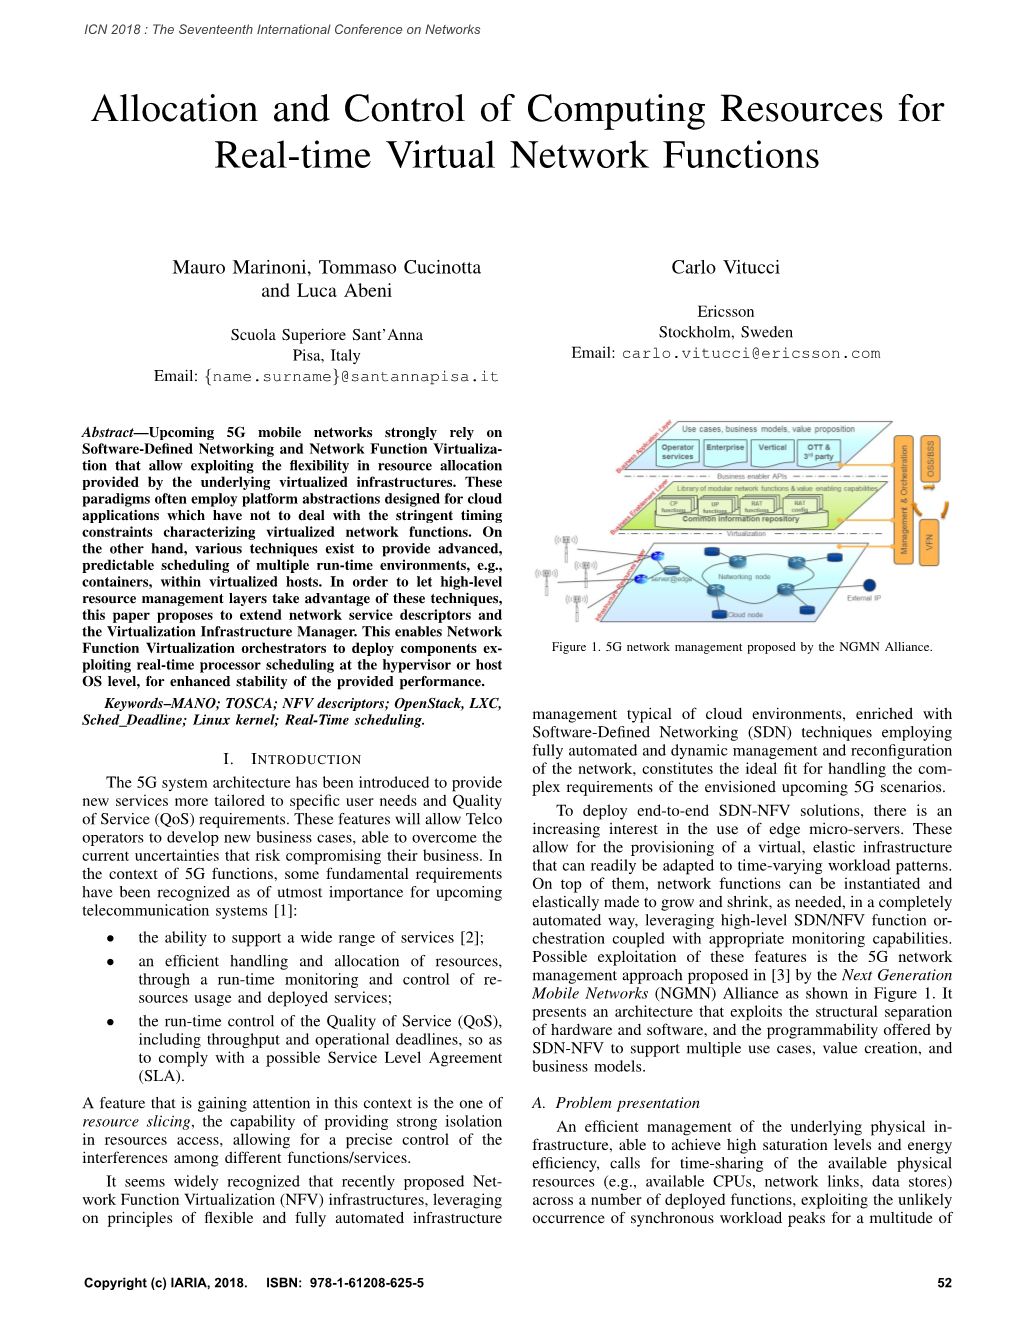 Allocation and Control of Computing Resources for Real-Time Virtual Network Functions